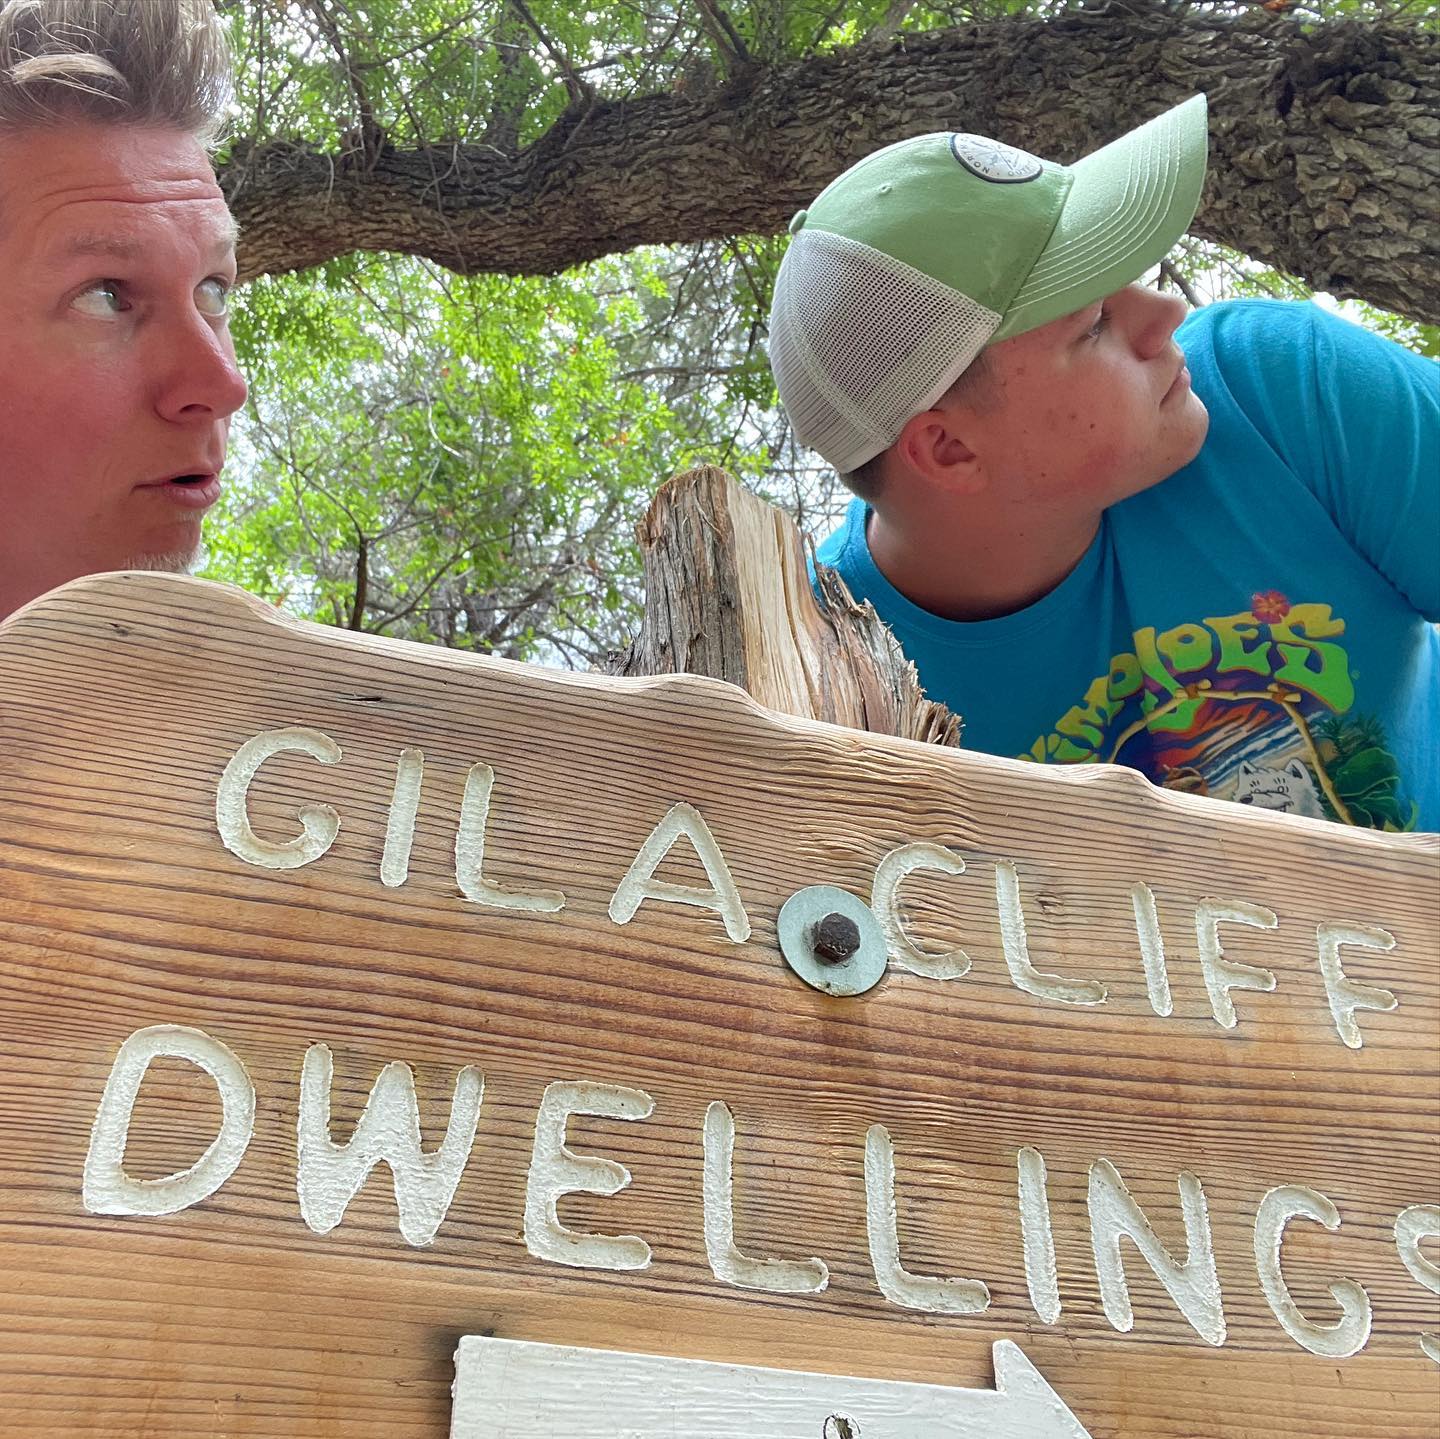 Day 6/10: Gila Cliff Dwellings National Monument, flooding and hail, and a red chile sauce that wailed on our mouths (and we loved it!).